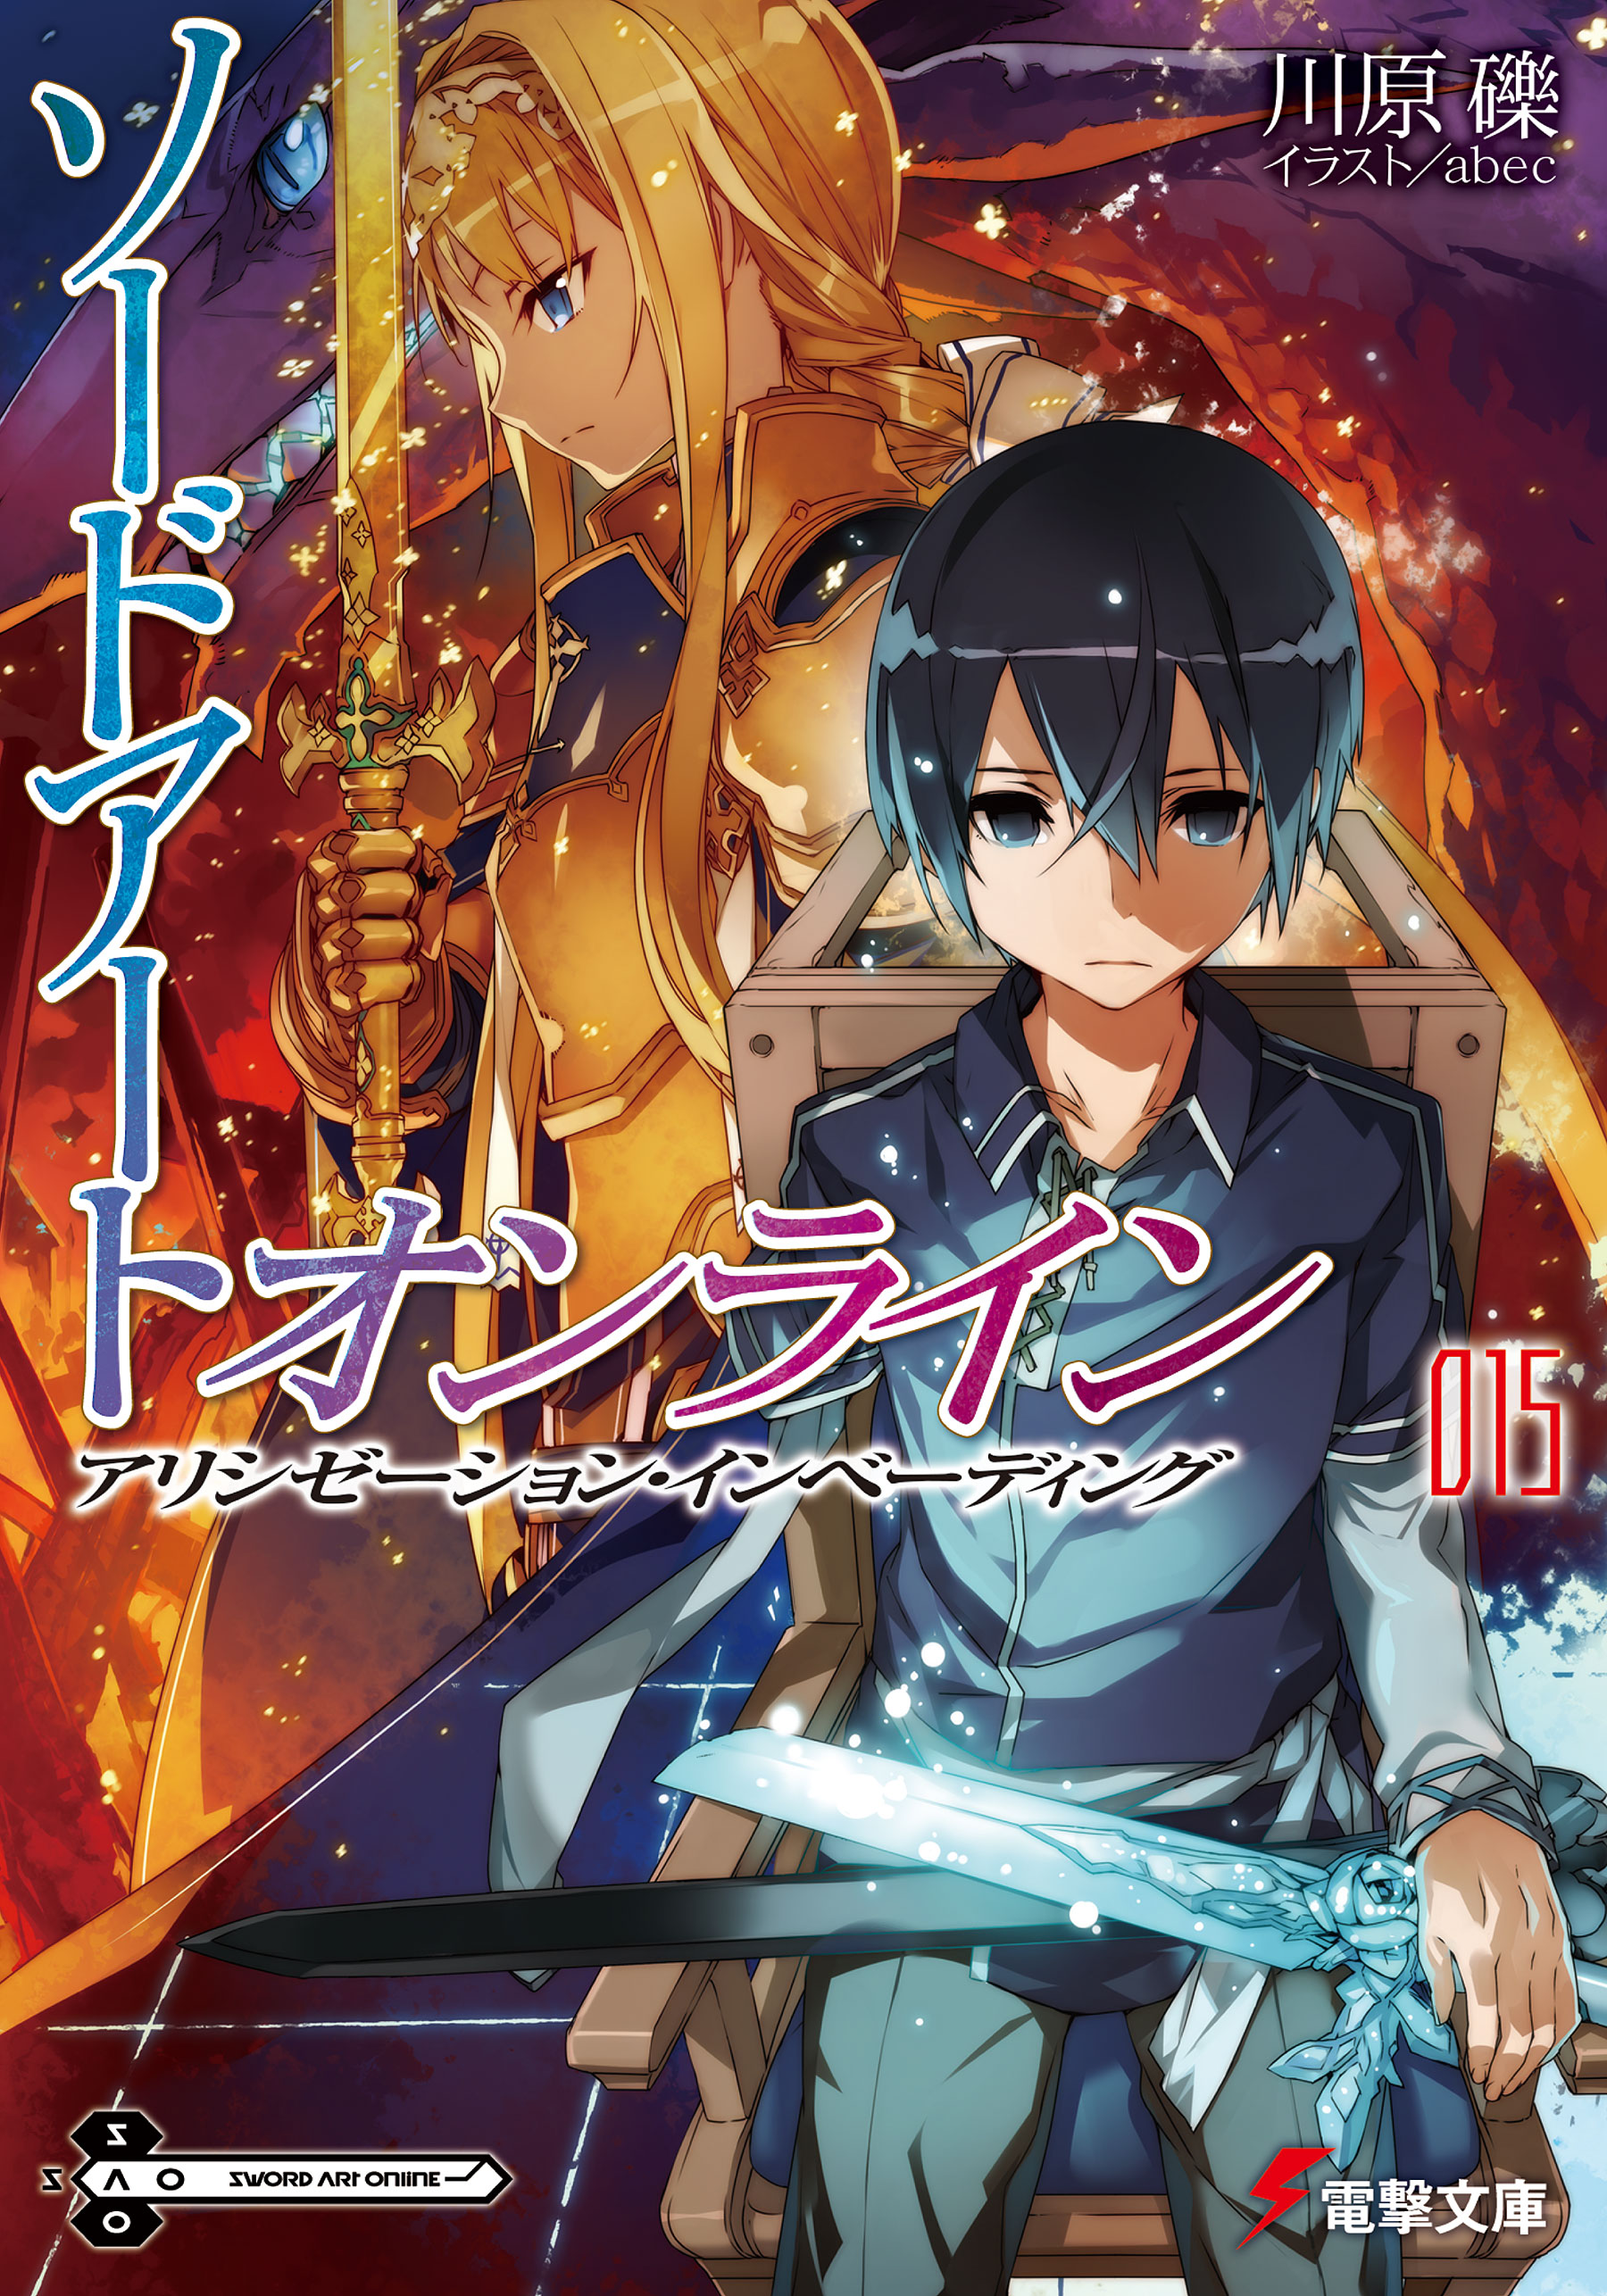 Try Sword Art Online: Alicization Lycoris's first chapter for free